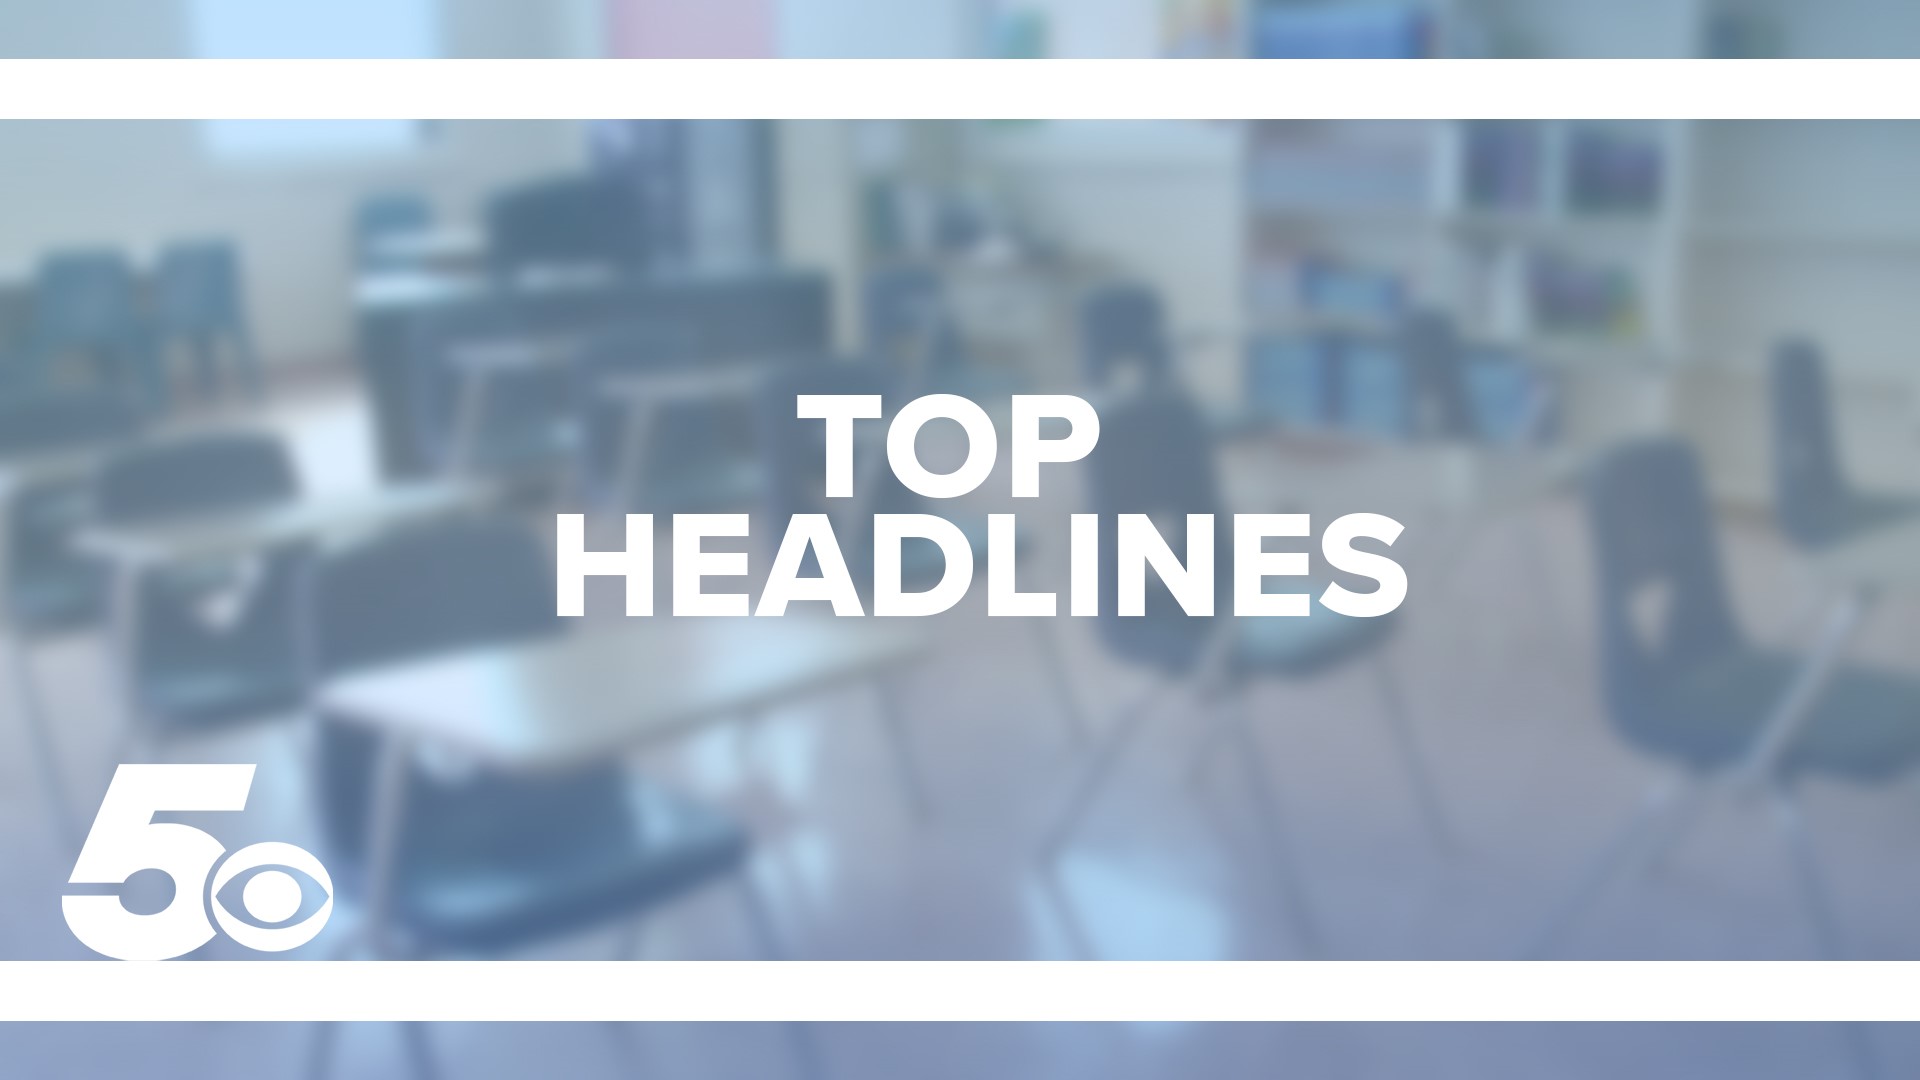 Take a look at this week's top headlines for local news across Northwest Arkansas and the River Valley!